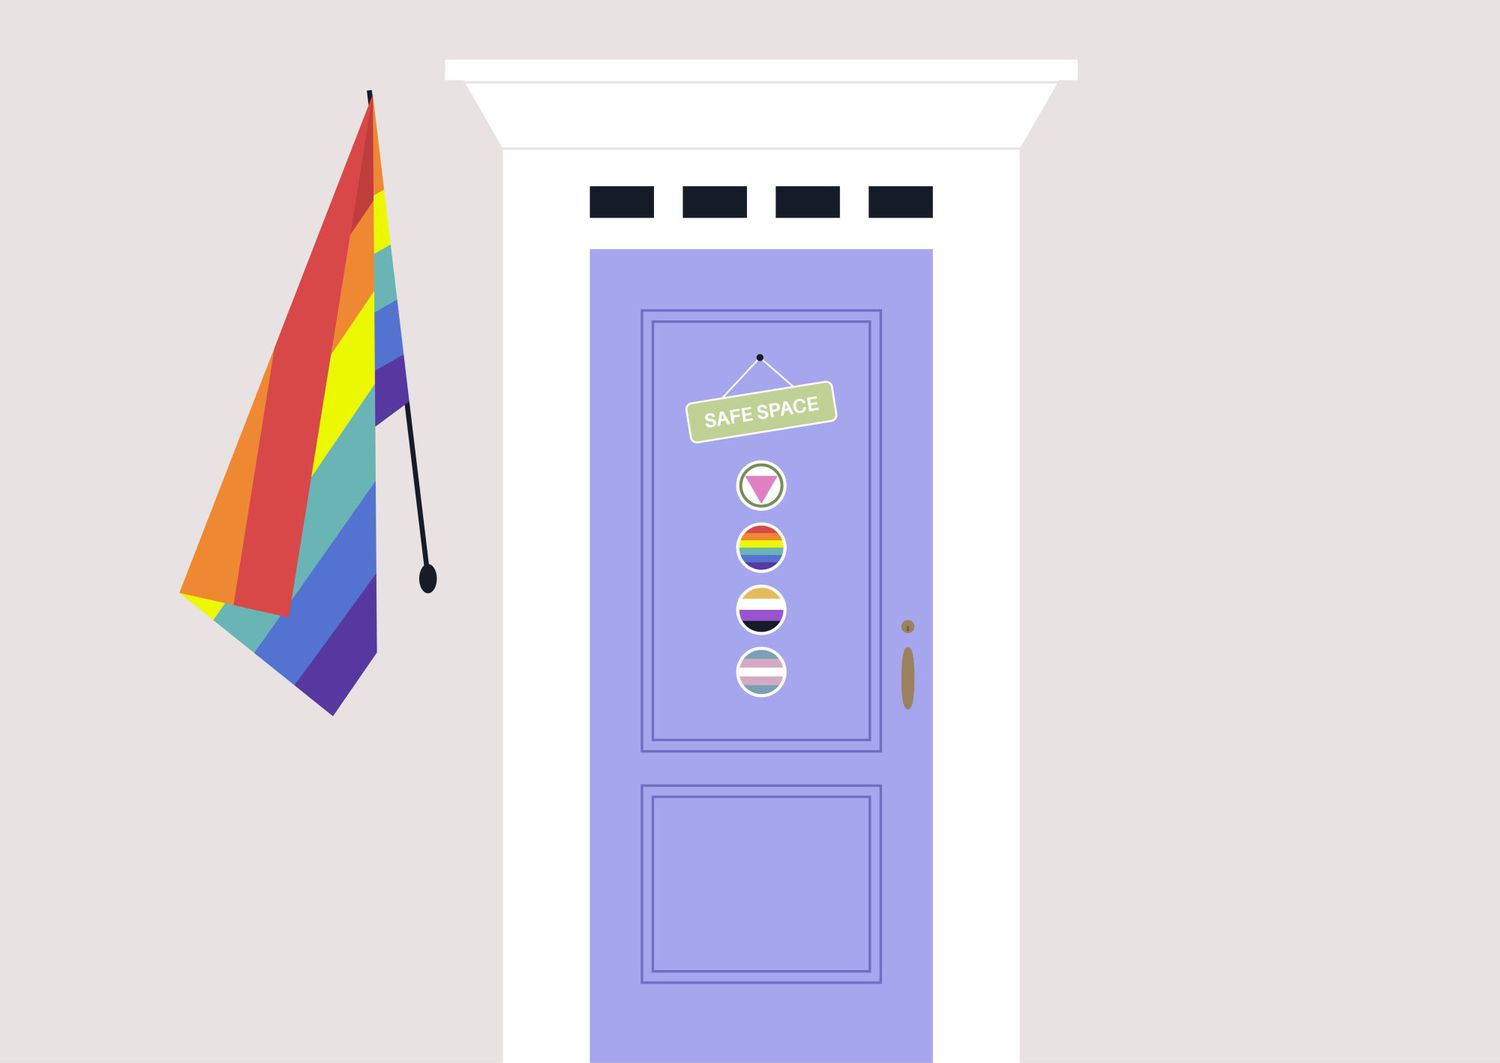 Purple door with safe space LGBTQIA+ Stickers and rainbow flag hanging nearby